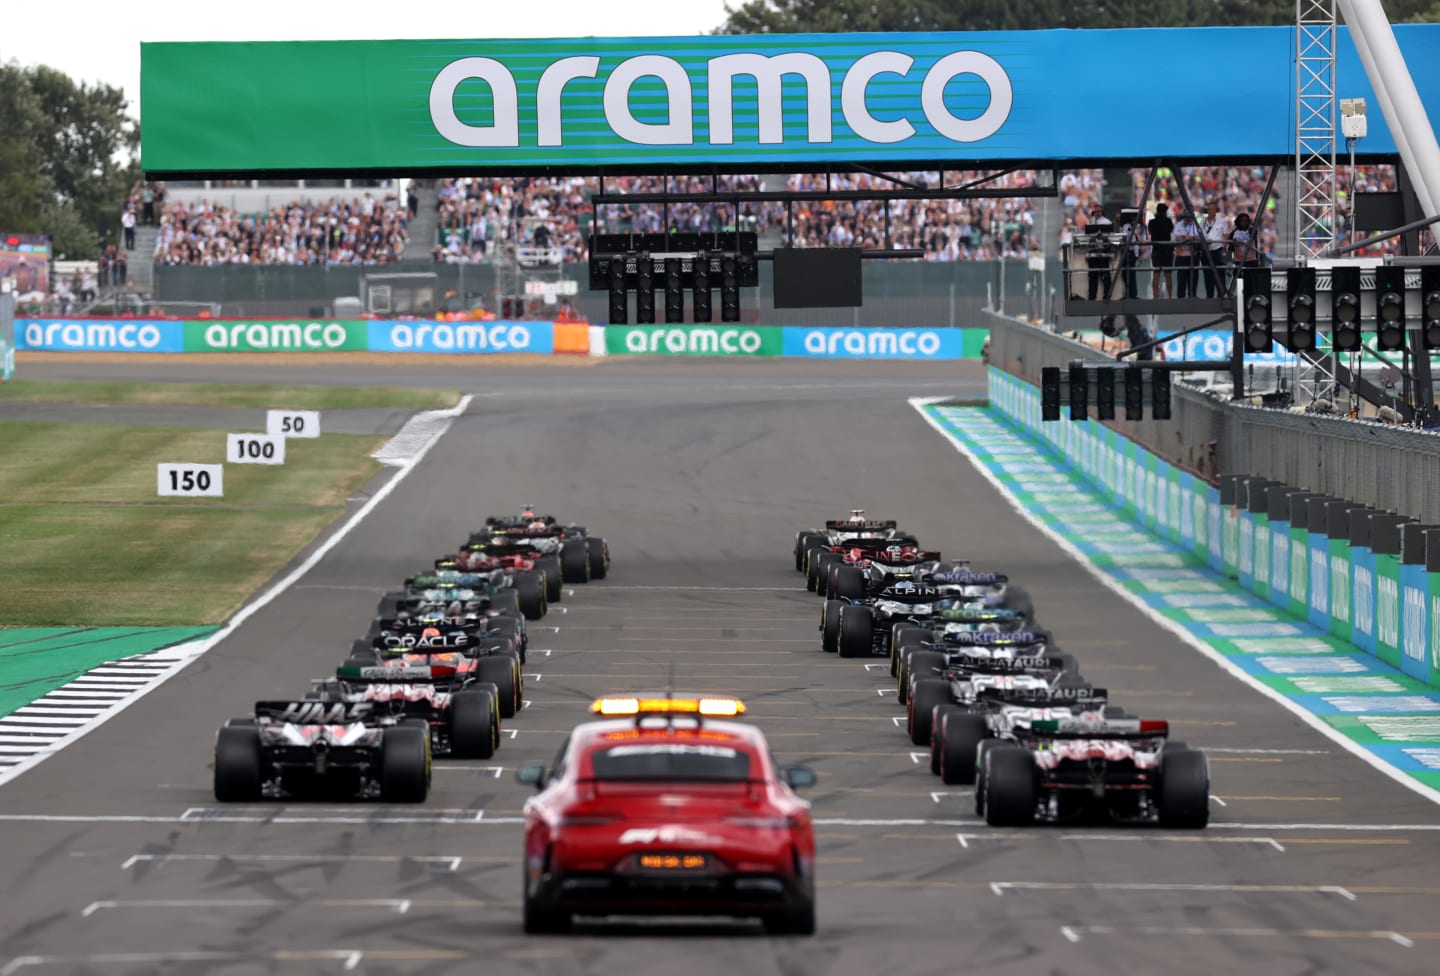 NORTHAMPTON, ENGLAND - JULY 09: A rear view of the grid at the start of the race during the F1